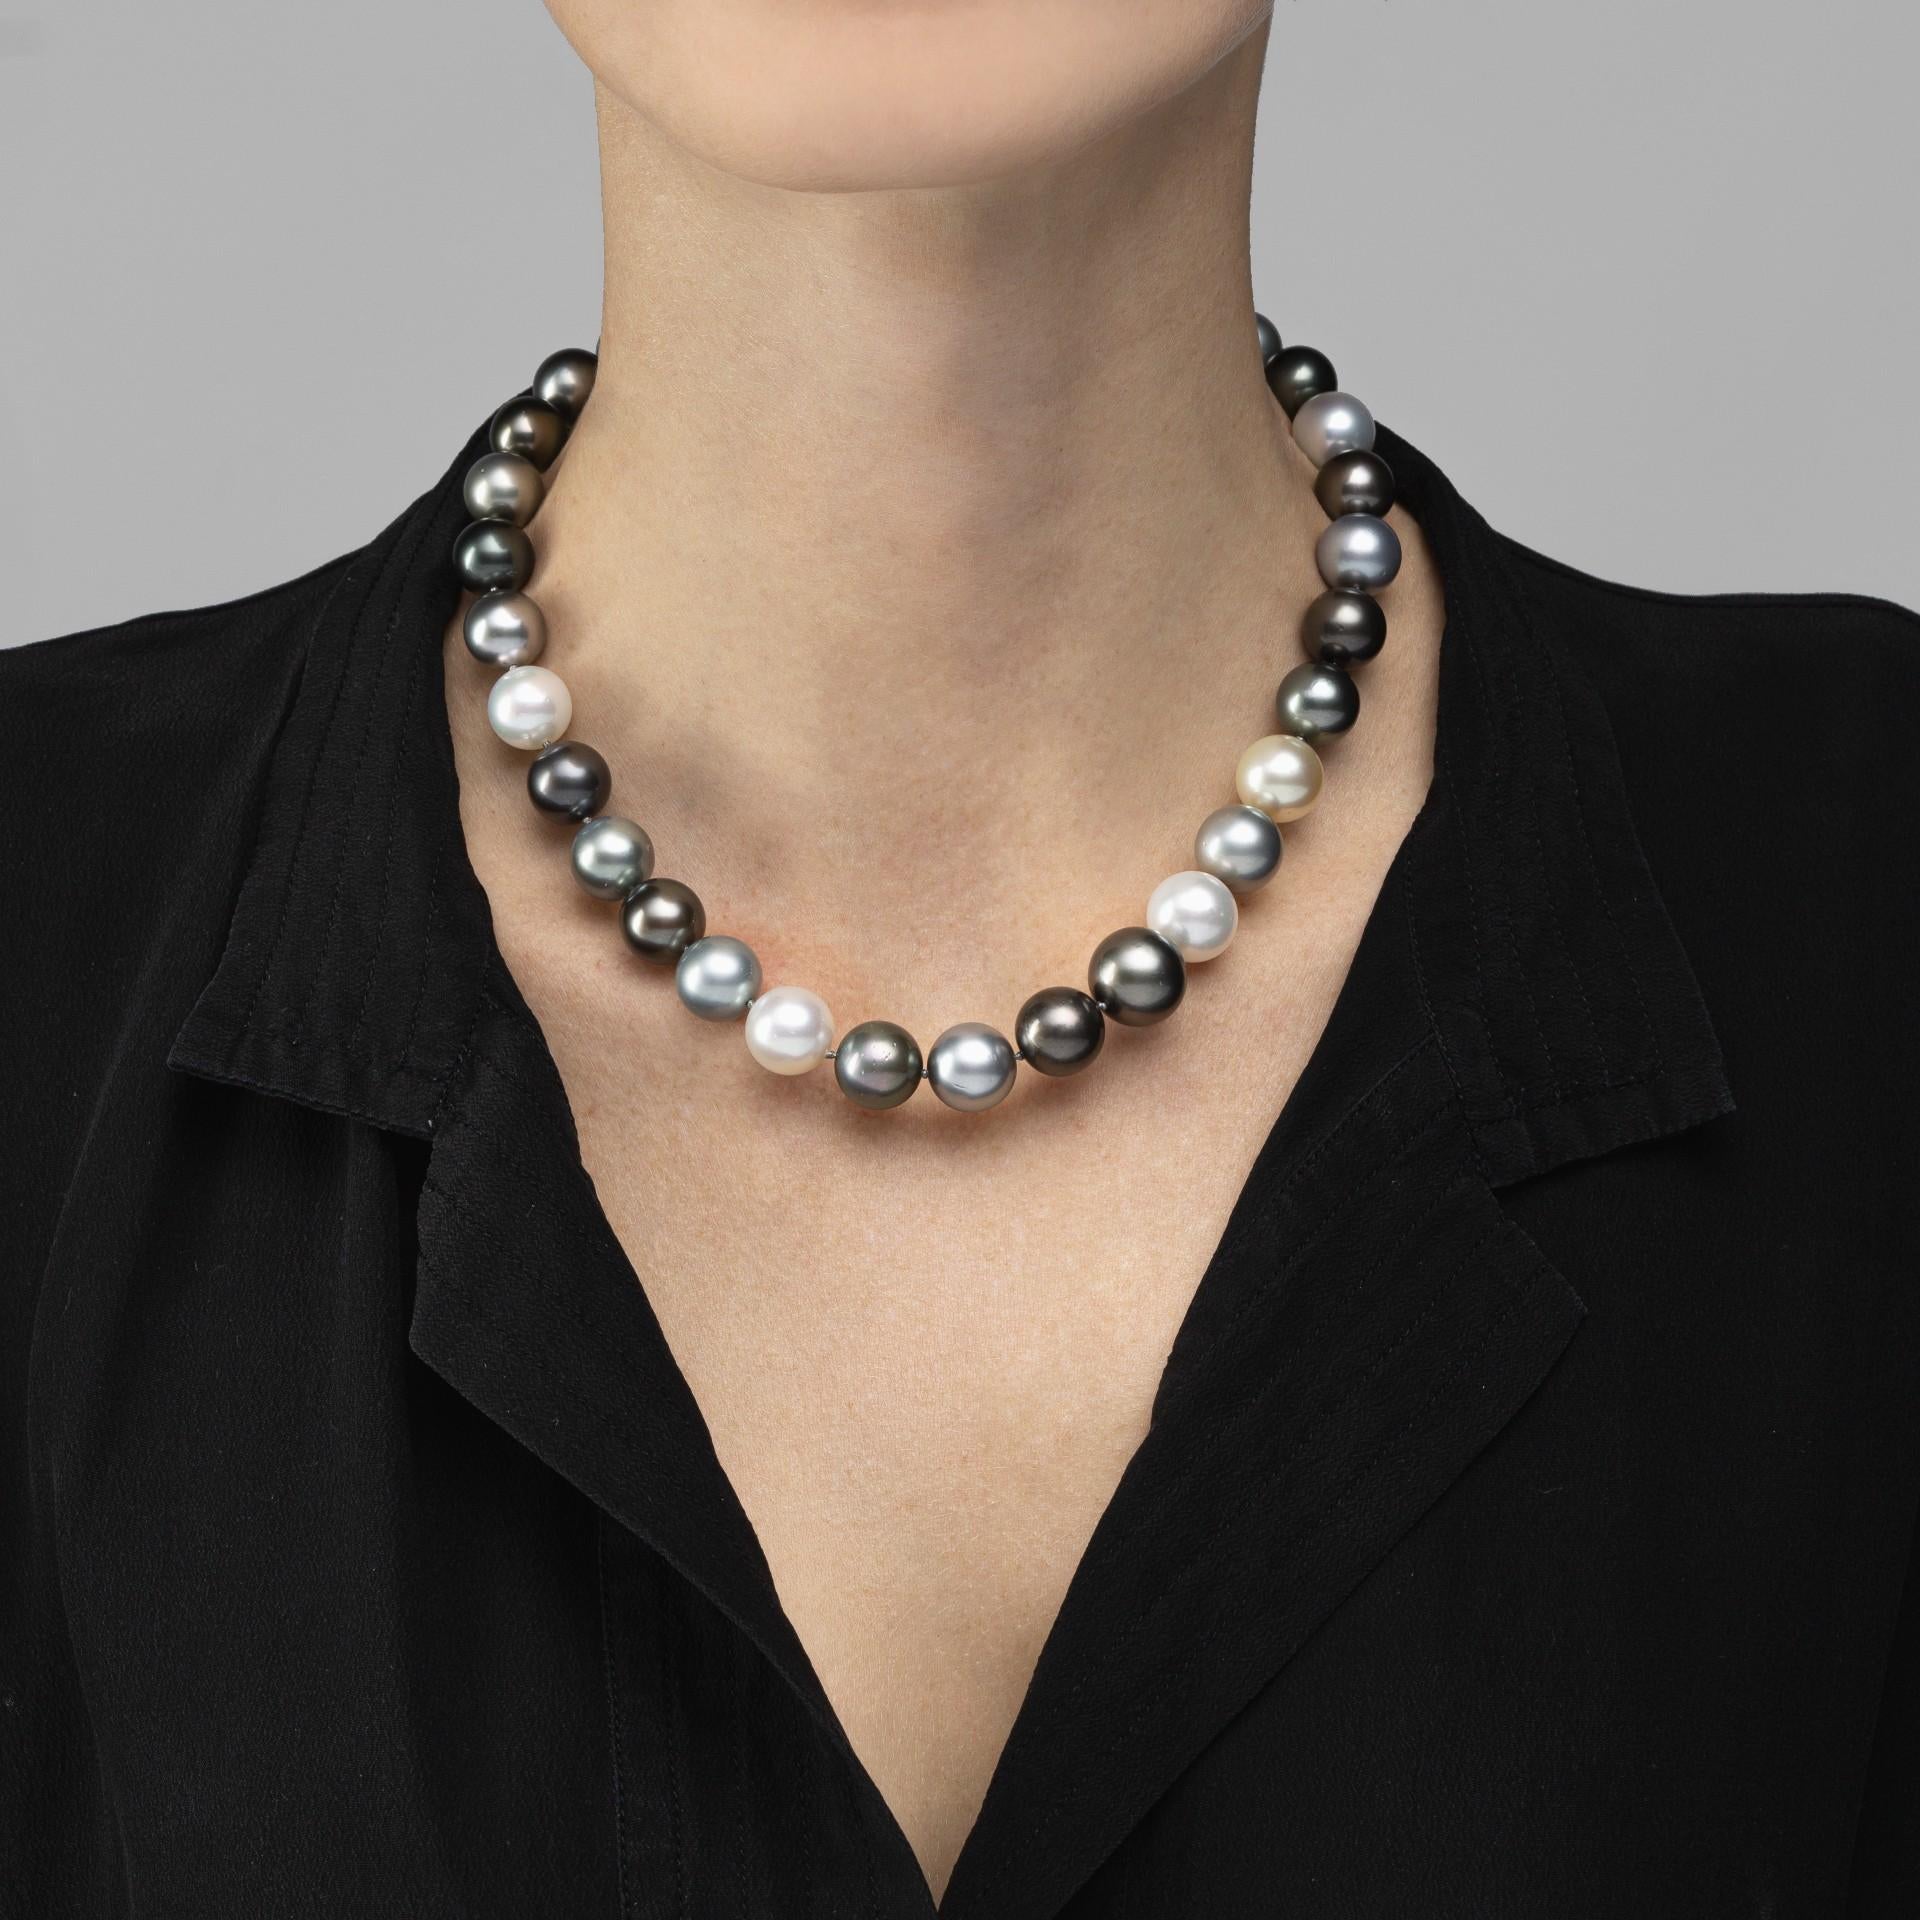 Alex Jona collection, 17.52 inch long necklace consisting of thirty three Tahiti  grey pearls and South Sea White Pearls, the pearls are strung with an invisible clasps. Pearl Quality: AA Pearl Luster: AA
Length : L 17.52 in / 44.5 cm 
Pearl